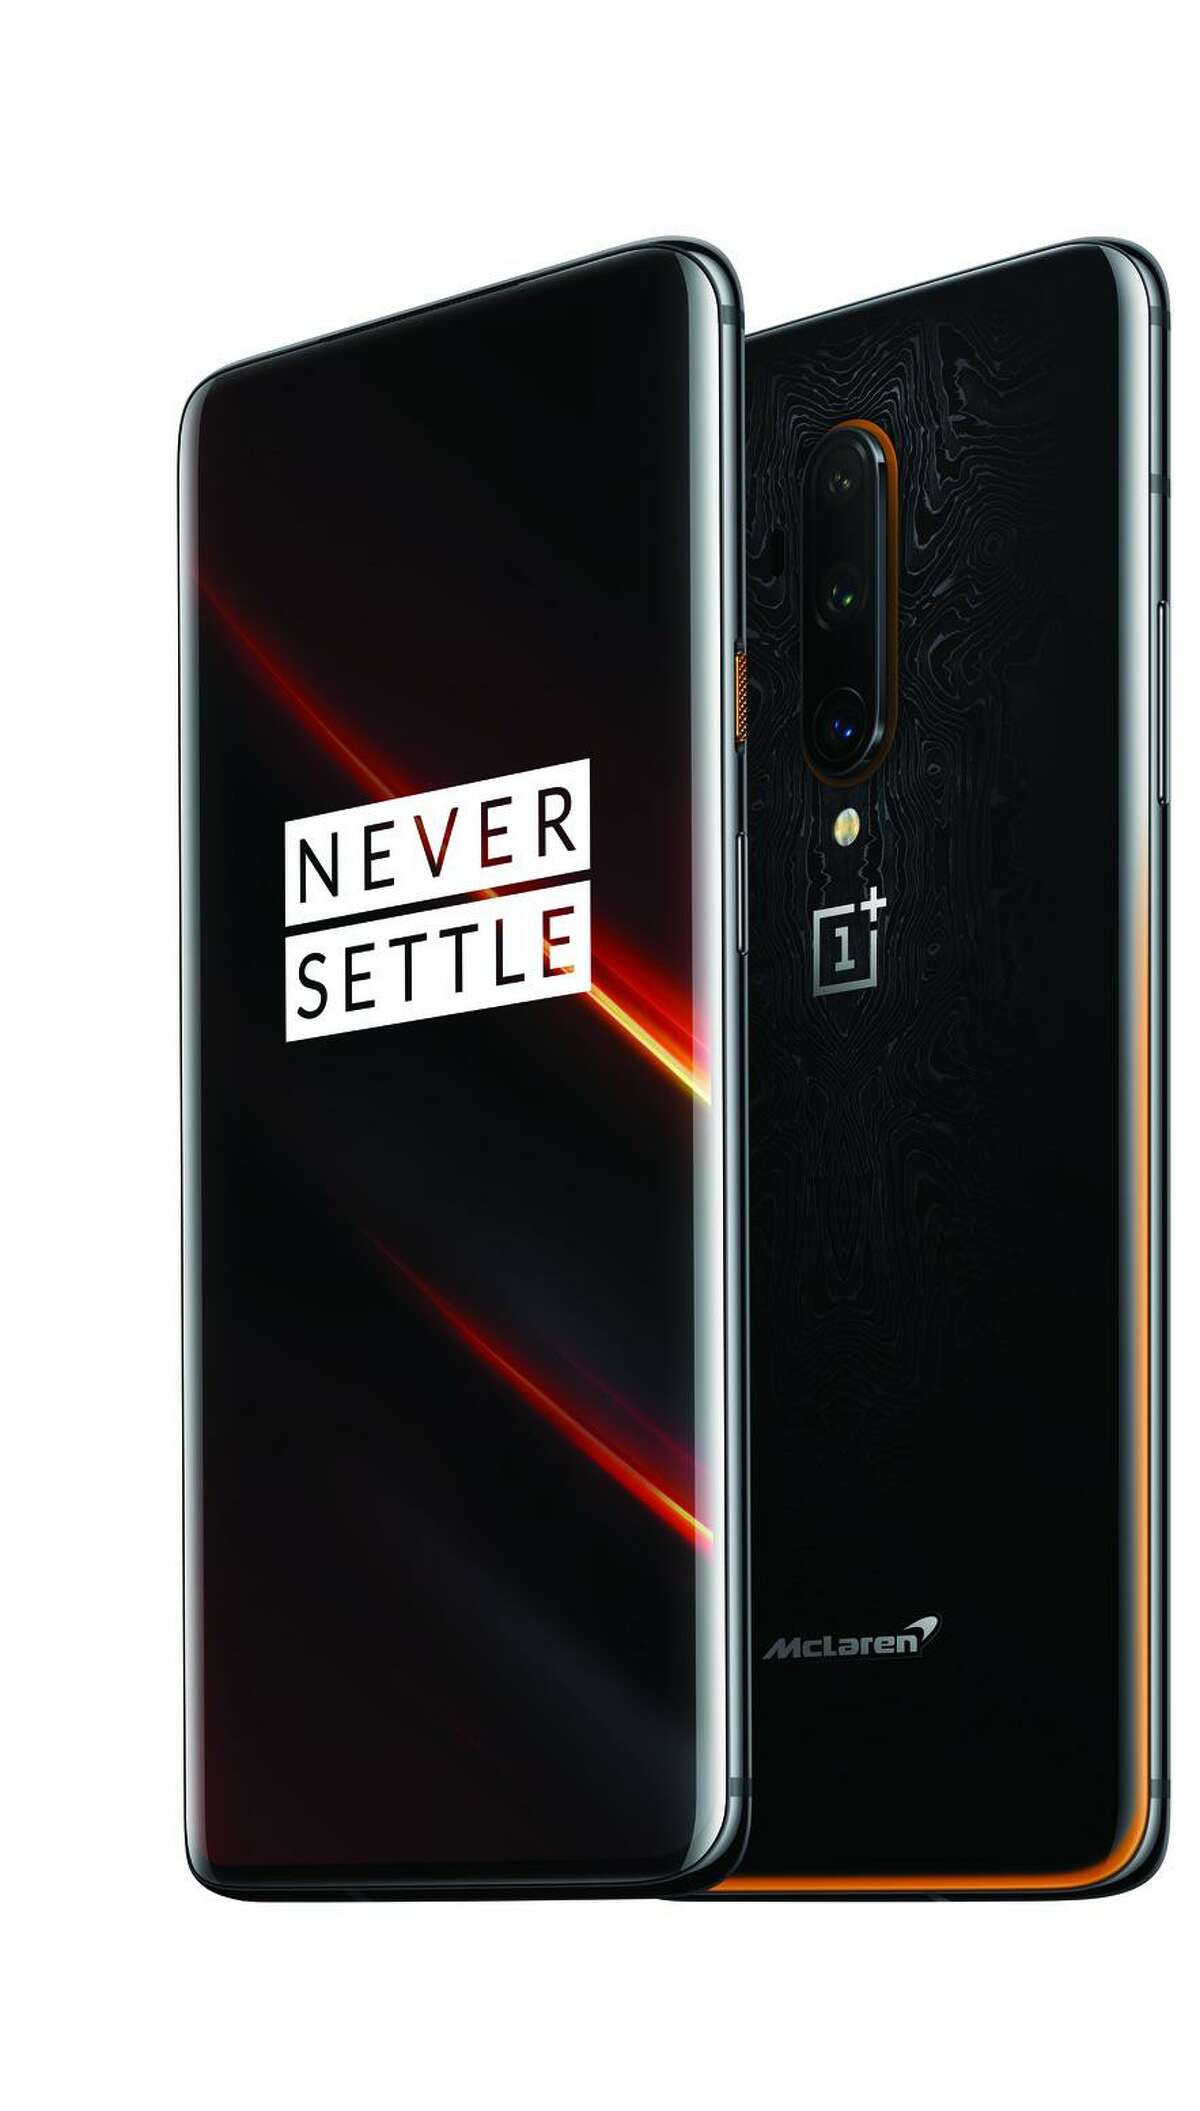 The OnePlus 7T Pro 5G McLaren is one of two phones that will work on T-Mobile's new 5G network.